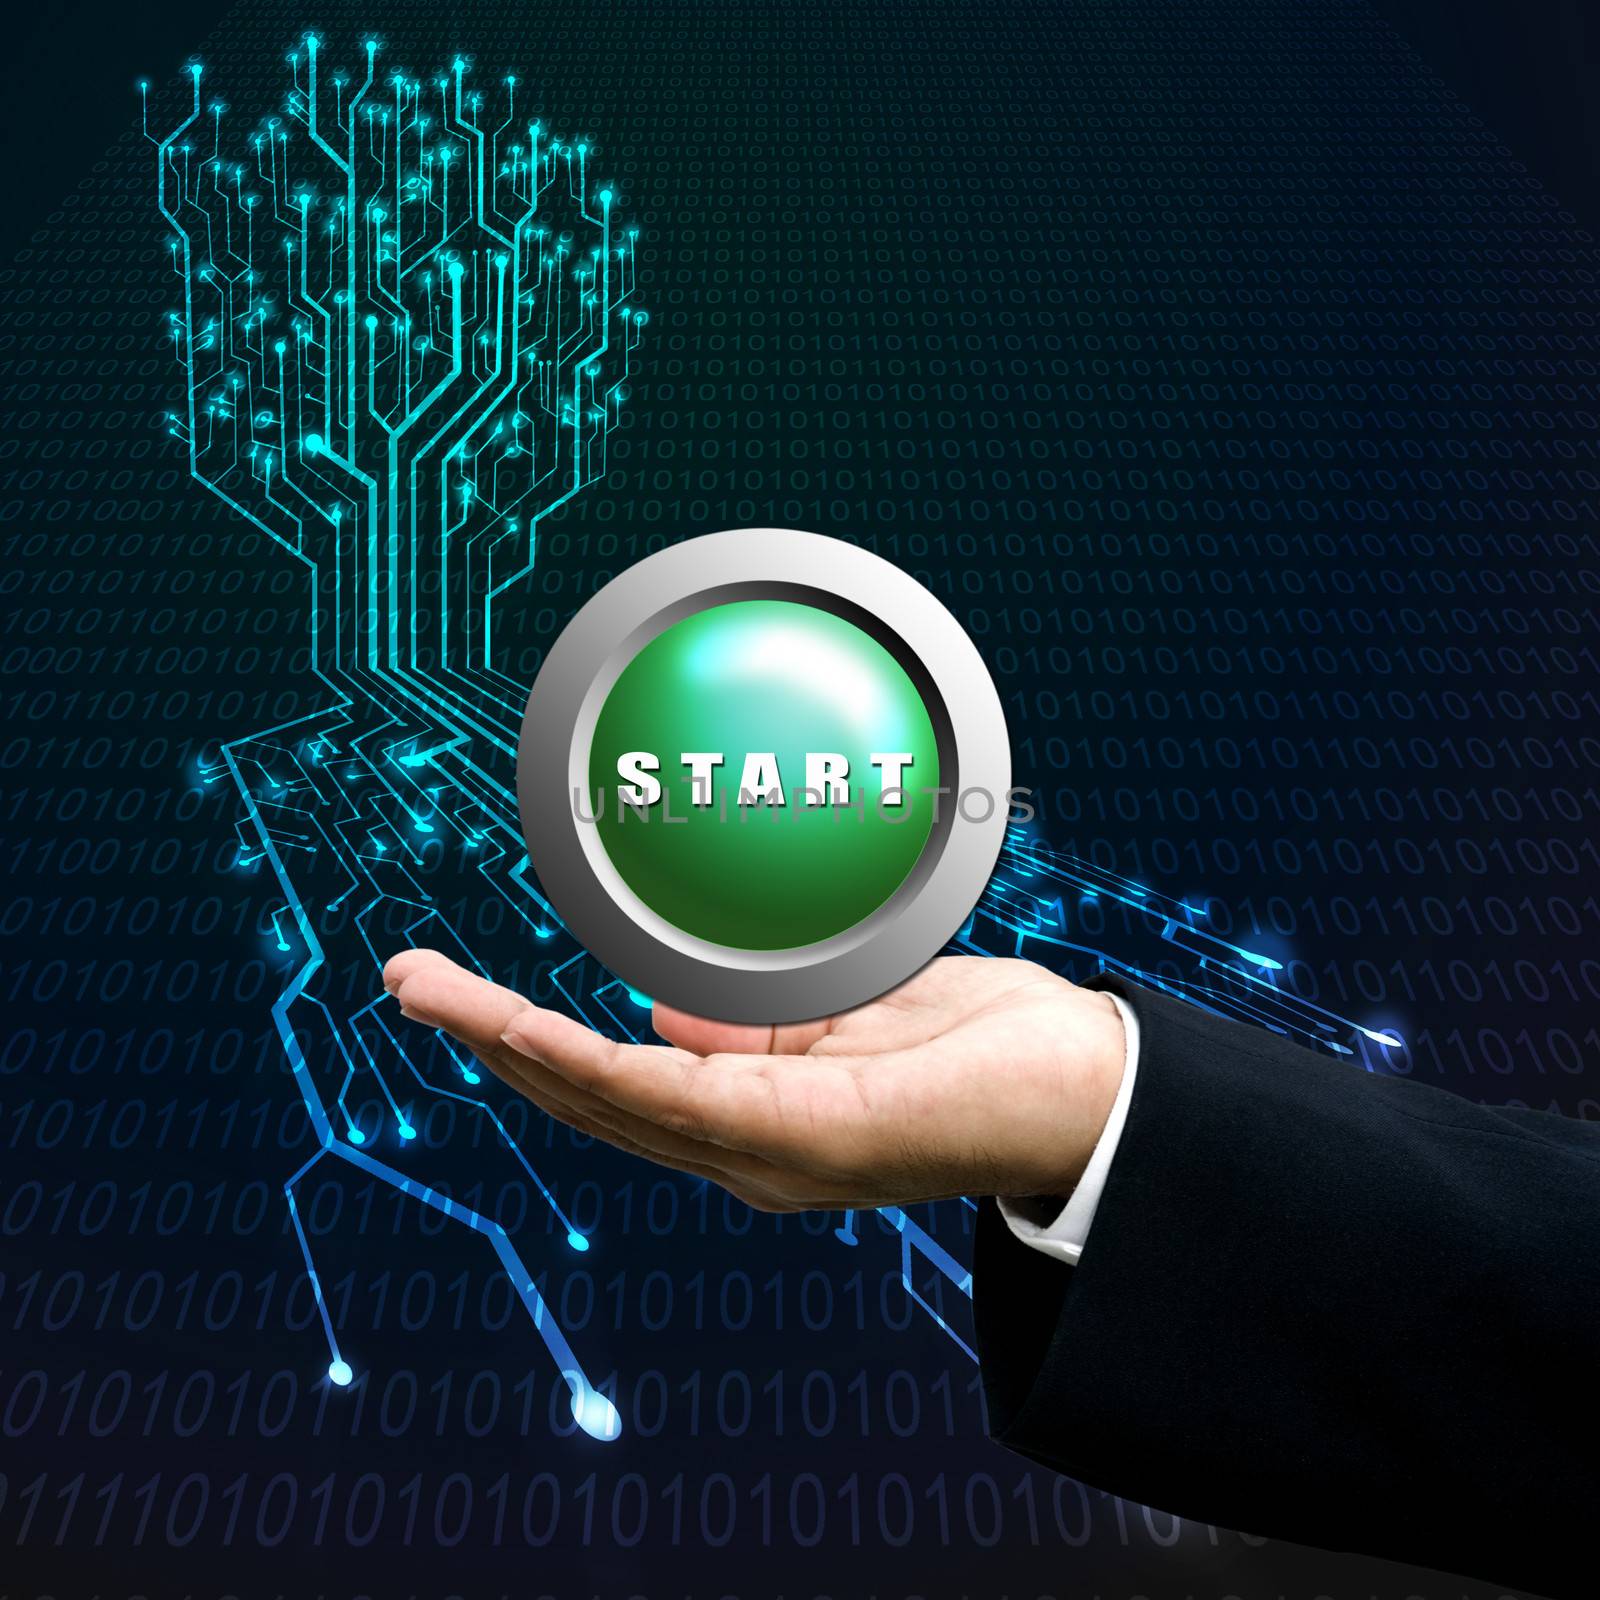 Start button on manager hand, Technology background by pixbox77